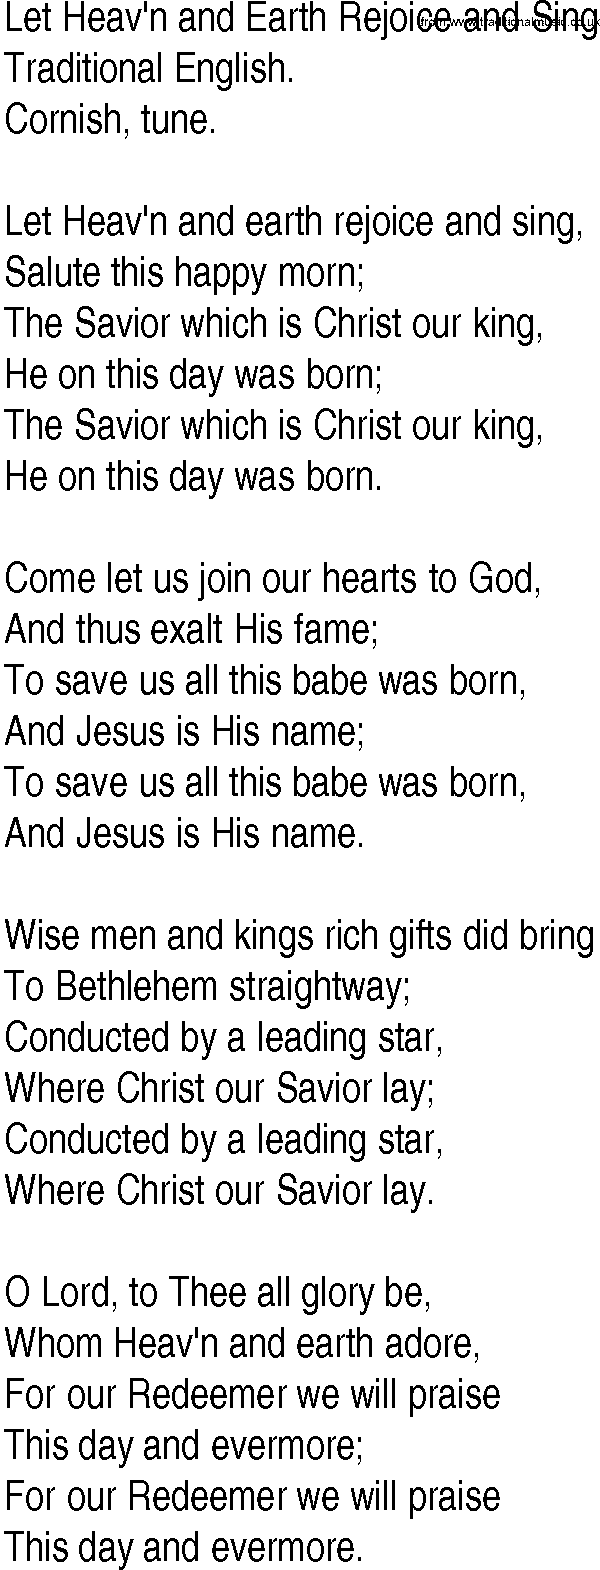 Hymn and Gospel Song: Let Heav'n and Earth Rejoice and Sing by Traditional English lyrics